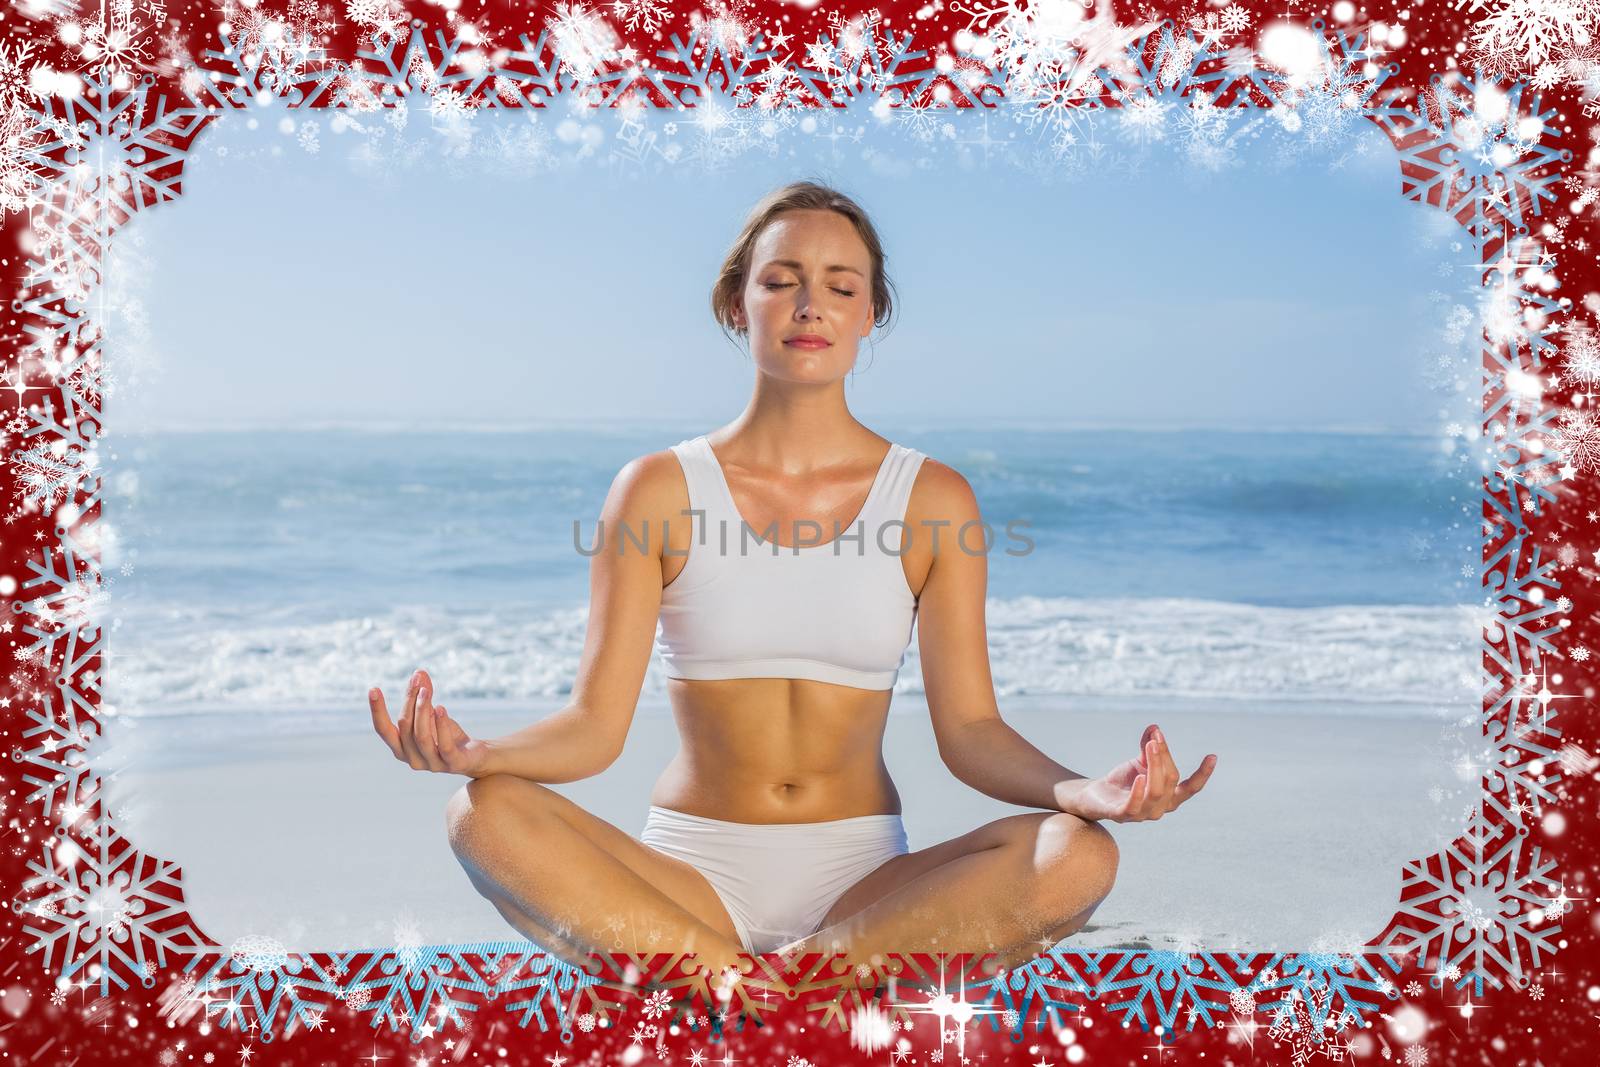 Composite image of fit woman sitting in lotus pose on the beach against snow